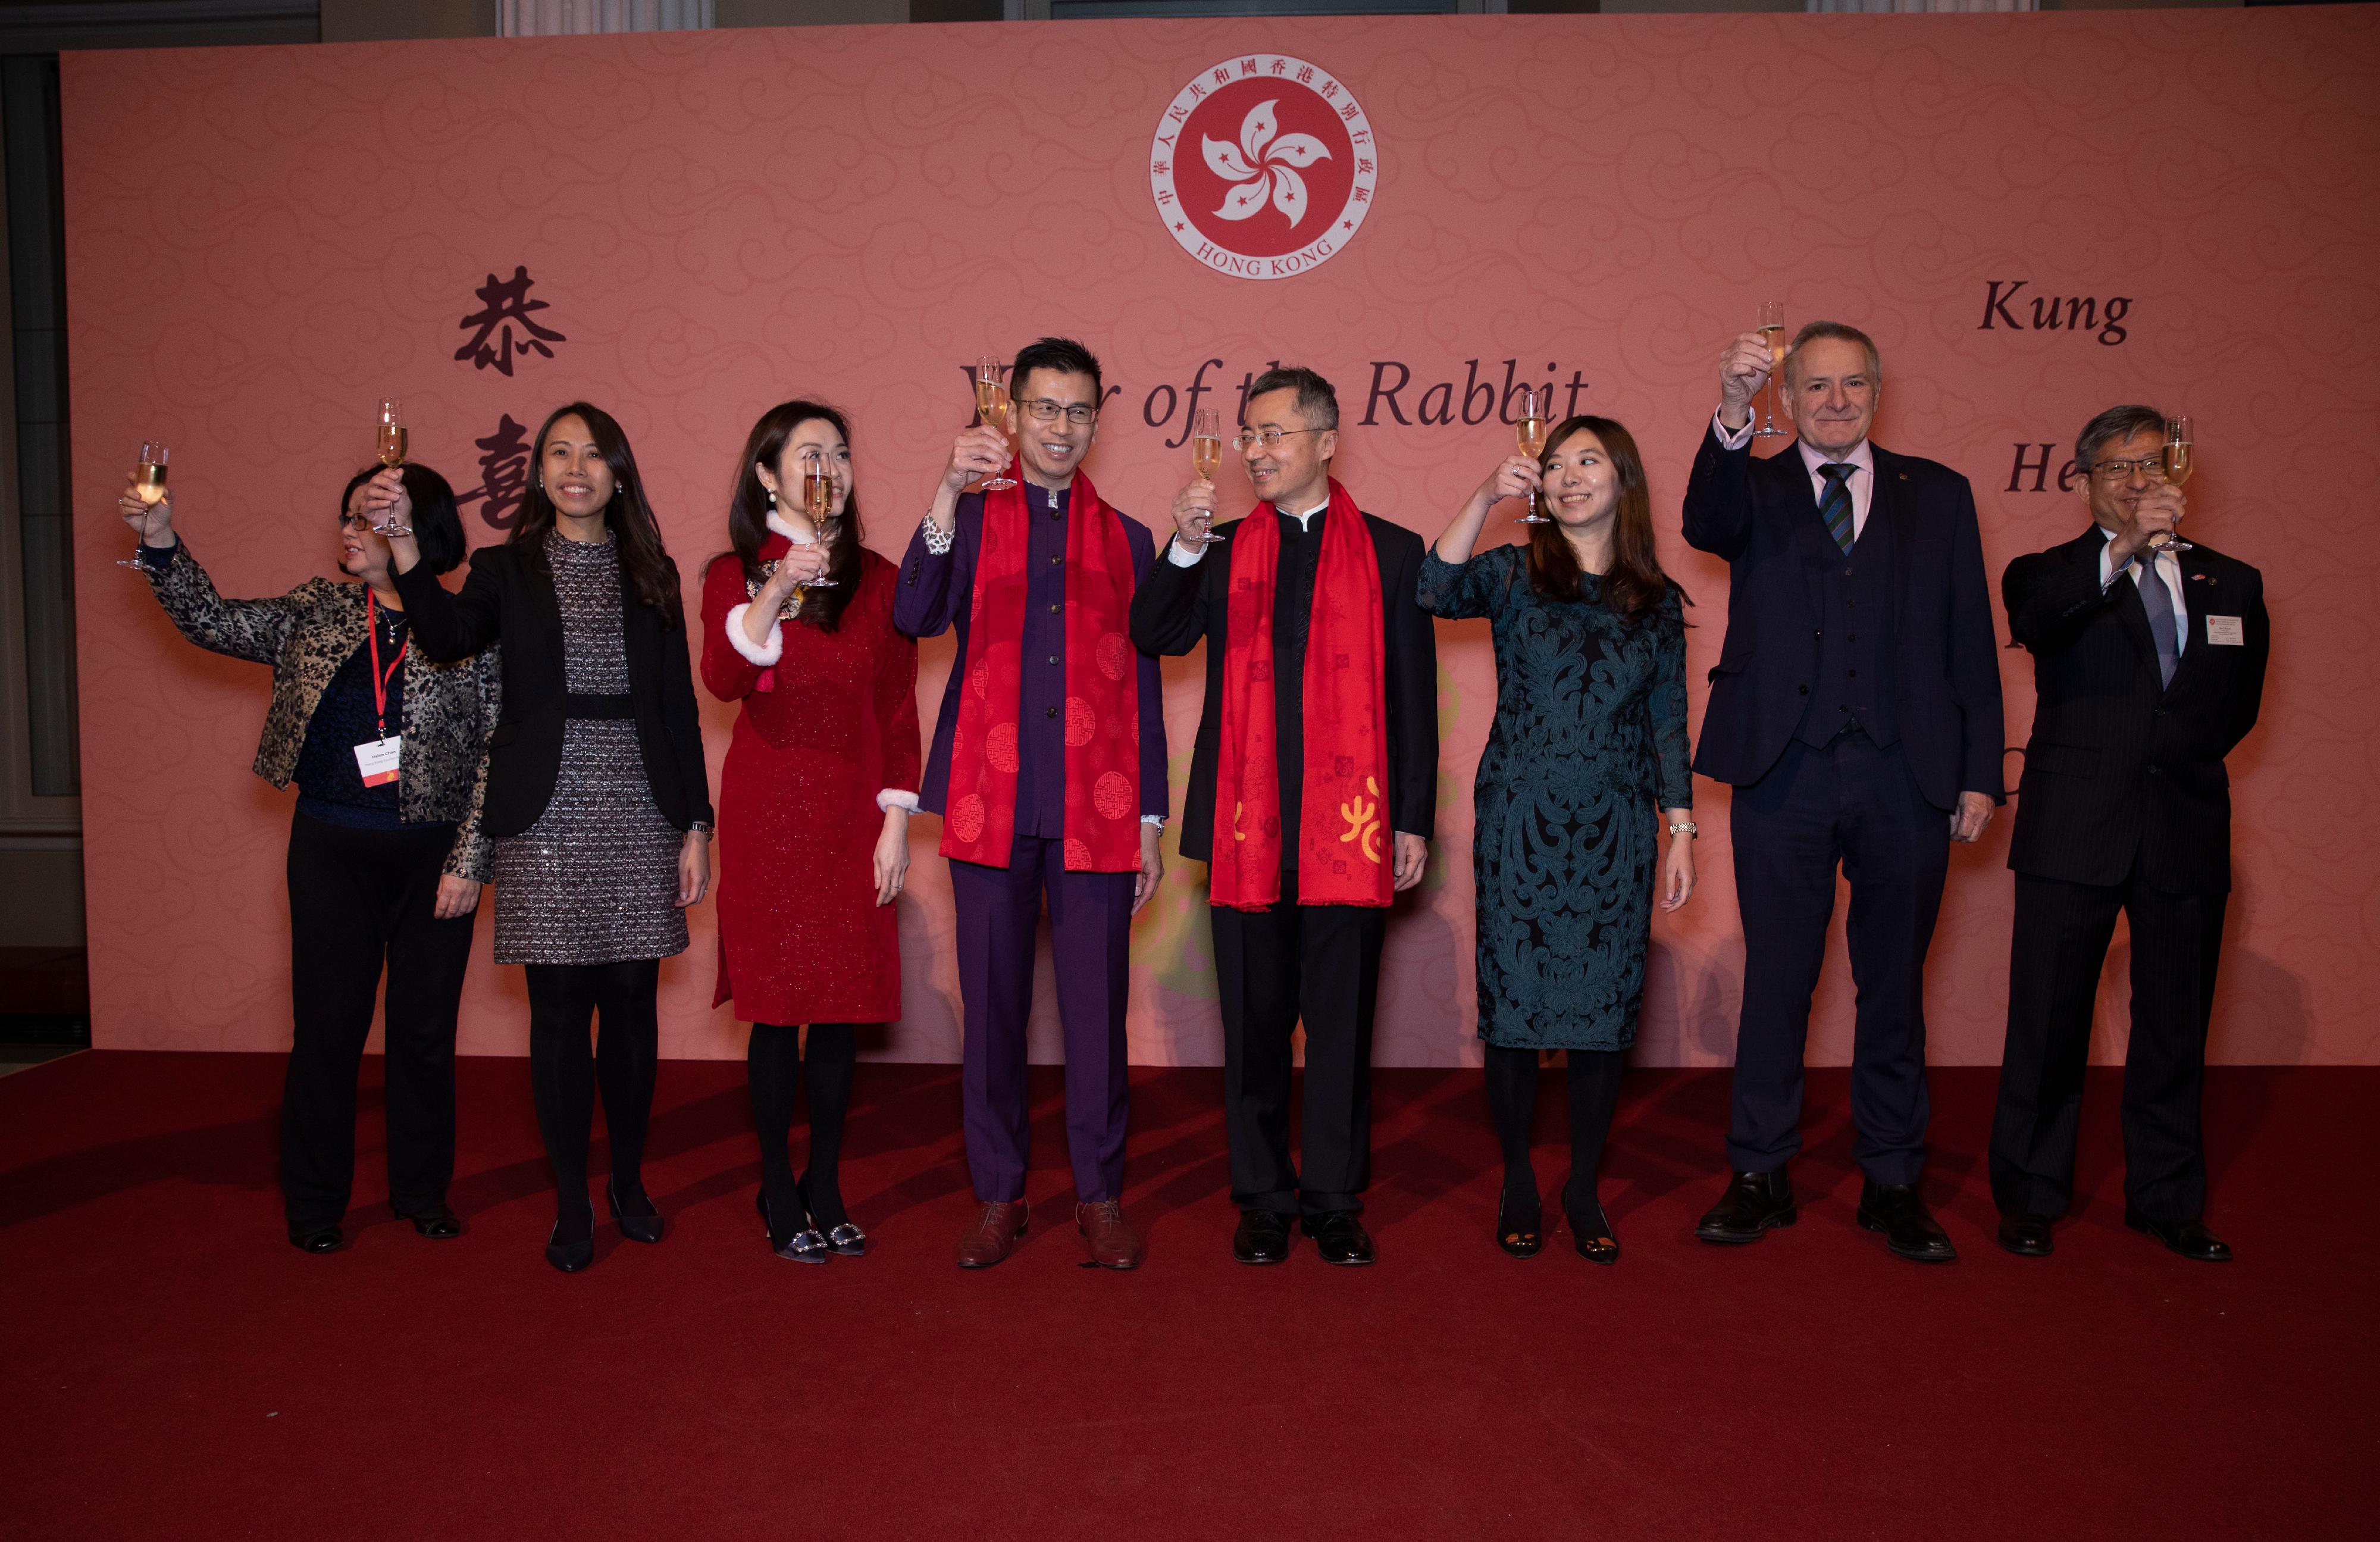 The Hong Kong Economic and Trade Office, London (London ETO) greeted the Year of the Rabbit in the United Kingdom by hosting a celebratory reception at Banqueting House, Whitehall, in London on January 26 (London time). Photo shows officiating guests, (from left)  the Conventions, Exhibitions and Corporate Events Department Manager of the Hong Kong Tourism Board in Europe, Ms Helen Chan; Deputy Director-General of the London ETO Ms Amy Wong; the Director of the UK, Nordics and Ireland of the Hong Kong Trade Development Council, Ms Daisy Ip; the Director-General of the London ETO, Mr Gilford Law; Minister Counsellor of the Embassy of the People's Republic of China in the United Kingdom of Great Britain and Northern Ireland Mr Wang Qi; Deputy Director-General of the London ETO Miss Josephine Tsang; Head of Business and Talent Attraction/Investment Promotion of the London ETO, Mr Andrew Davis; and the Marine Adviser of the Marine Department’s Regional Desk (London) /Regional Head (London) of the Hong Kong Shipping Registry, Mr Ben Lau, welcoming the Year of the Rabbit with a toast at the reception.